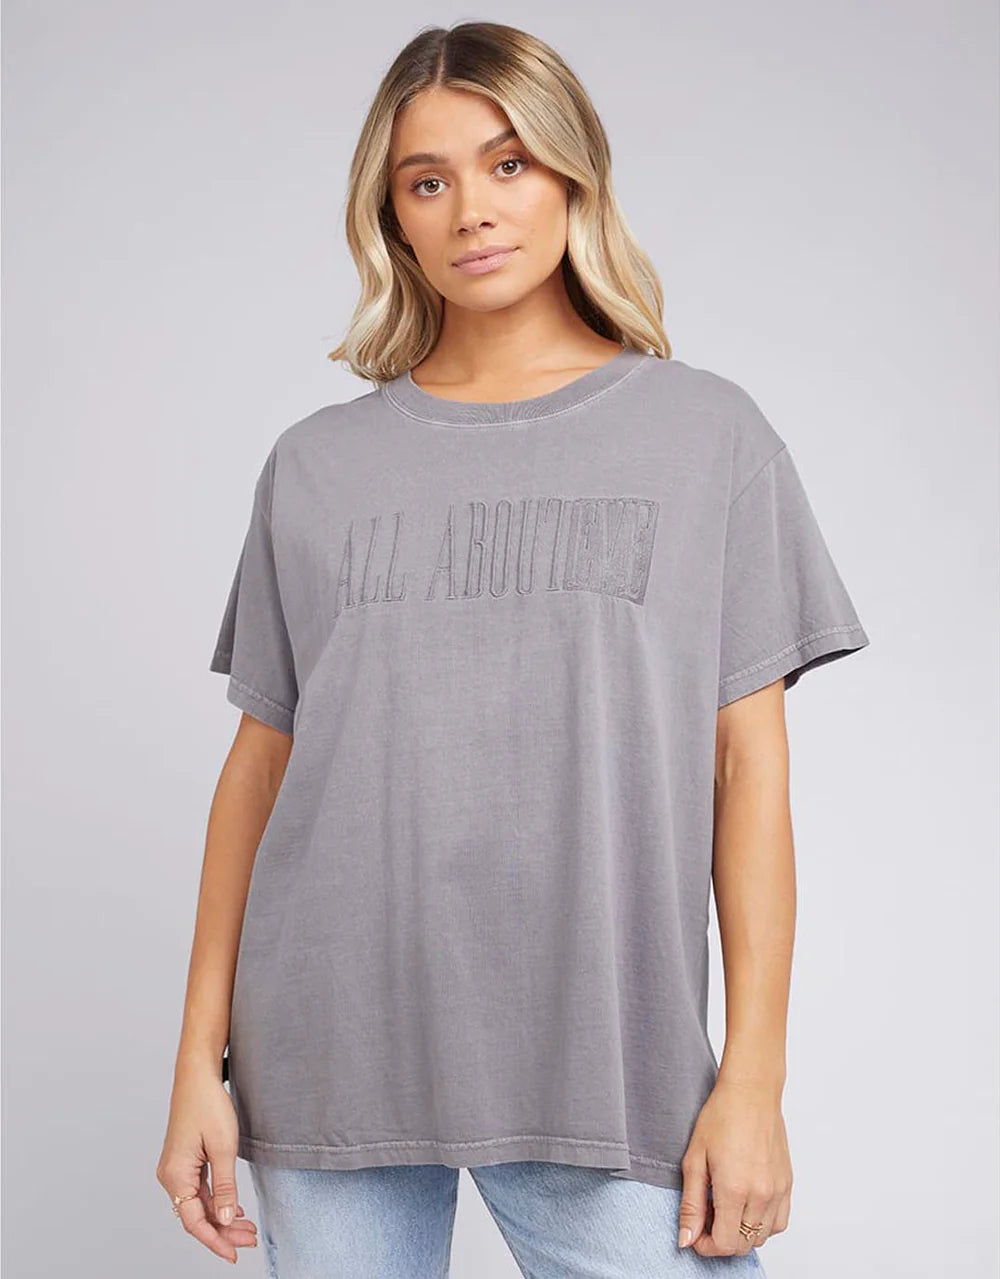 All about eve heritage tee - charcoal